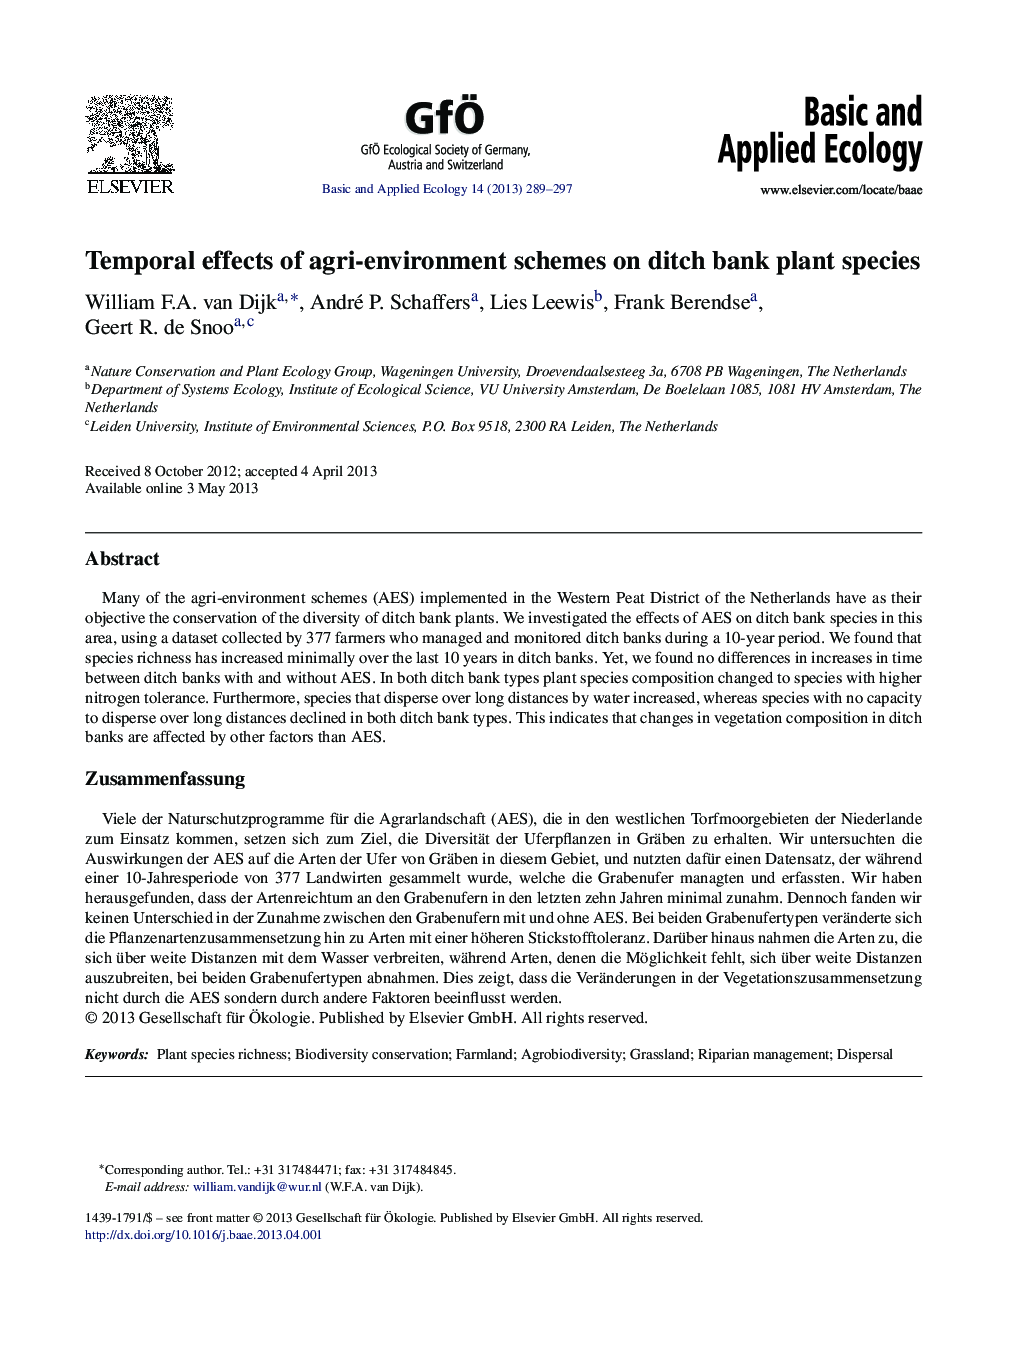 Temporal effects of agri-environment schemes on ditch bank plant species